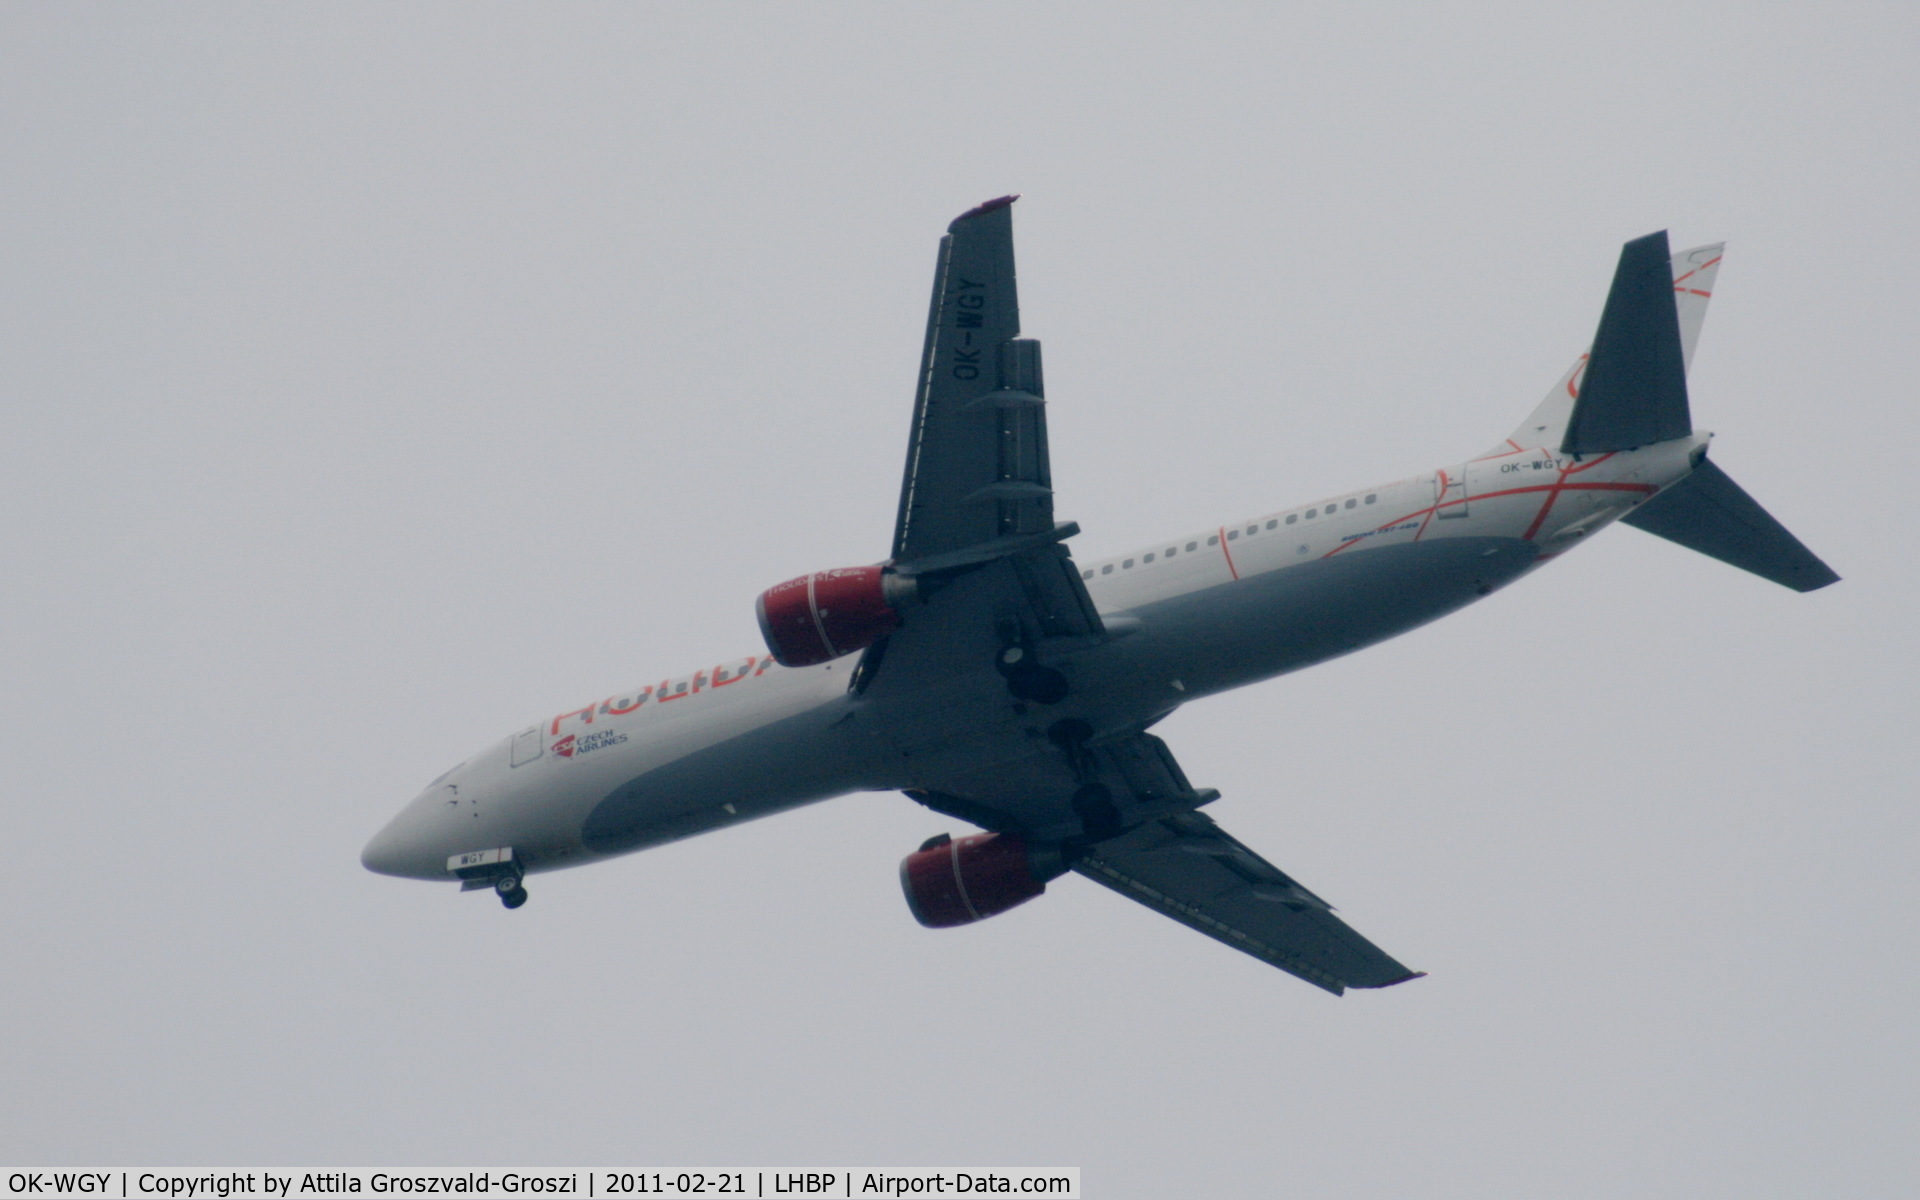 OK-WGY, 1991 Boeing 737-436 C/N 25839, On a landing direction, in Üllö city airspace.